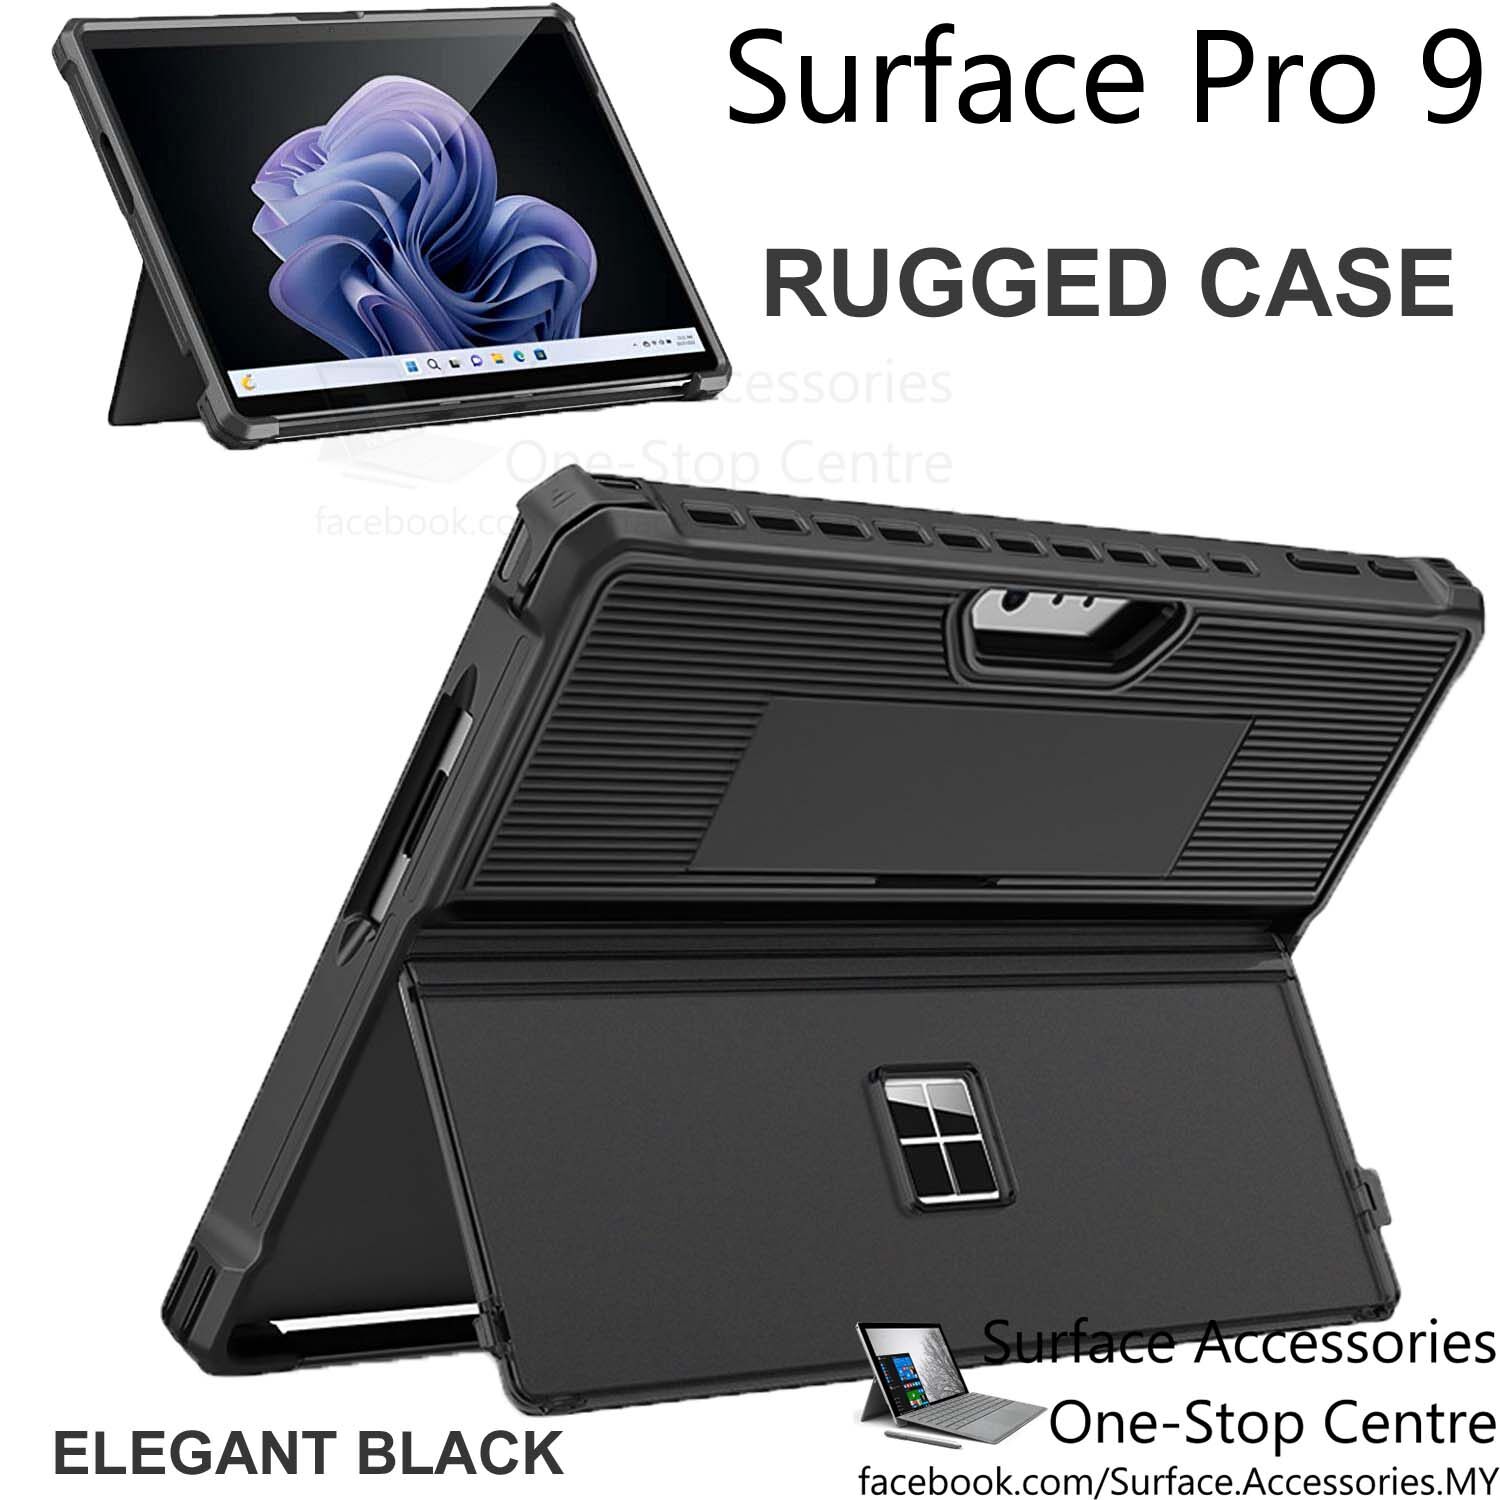 Microsoft Surface Pro 9 Rugged Casing Surface Pro 9 Rugged Case Pro 9 Stand Flip Case Surface Pro 9 Protective Case - Includes Kickstand Cover